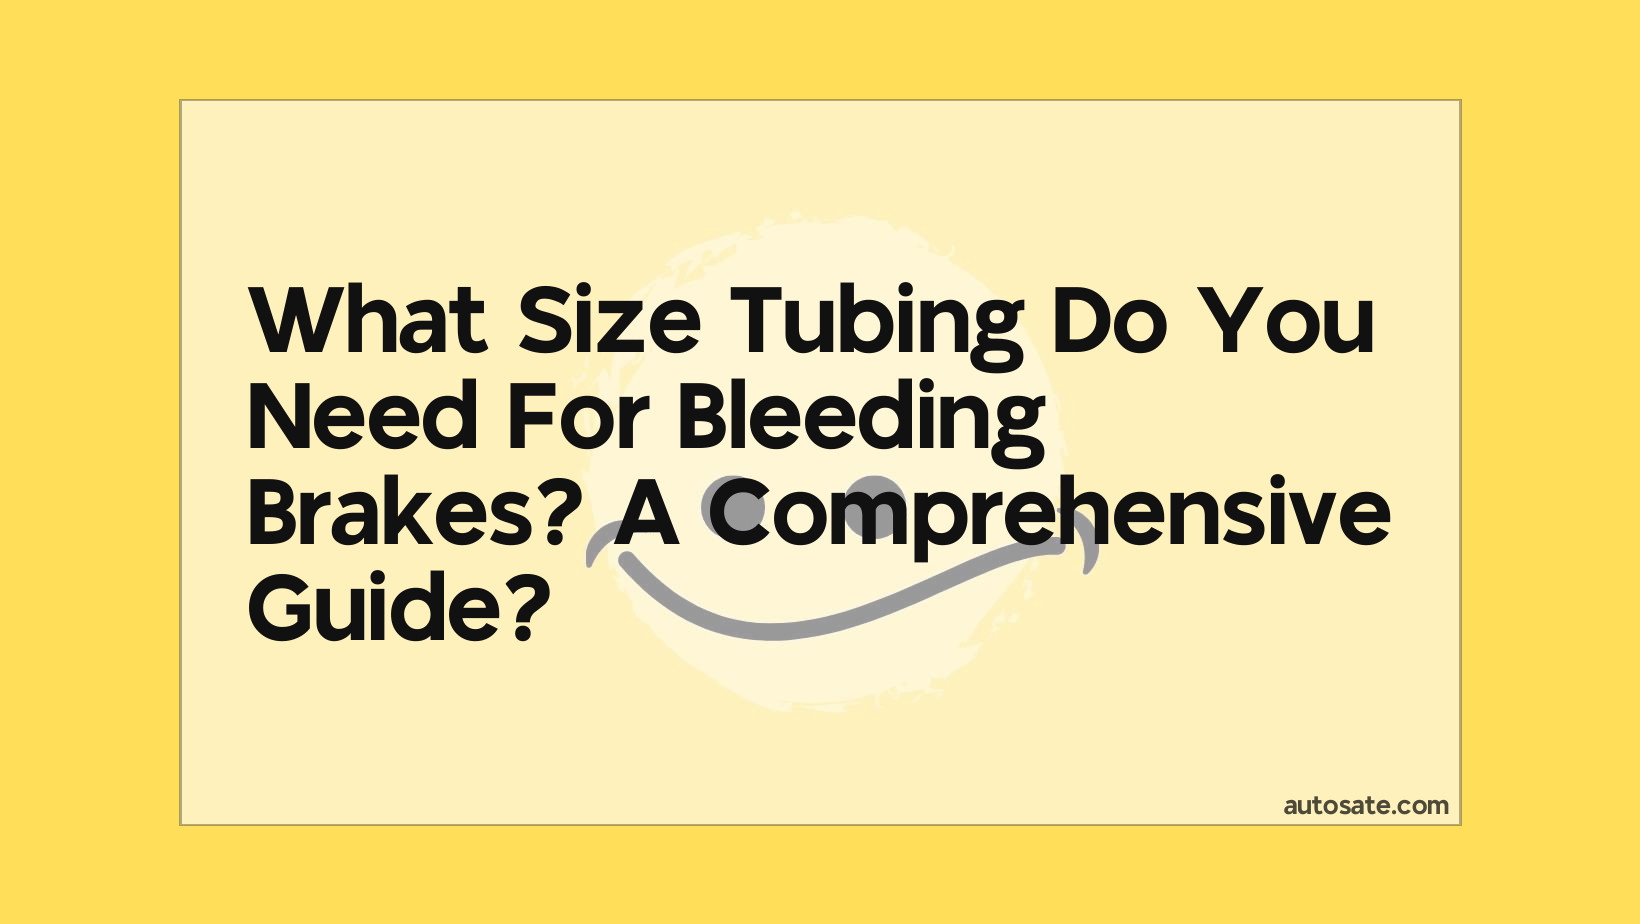 What Size Tubing Do You Need For Bleeding Brakes? A Comprehensive Guide